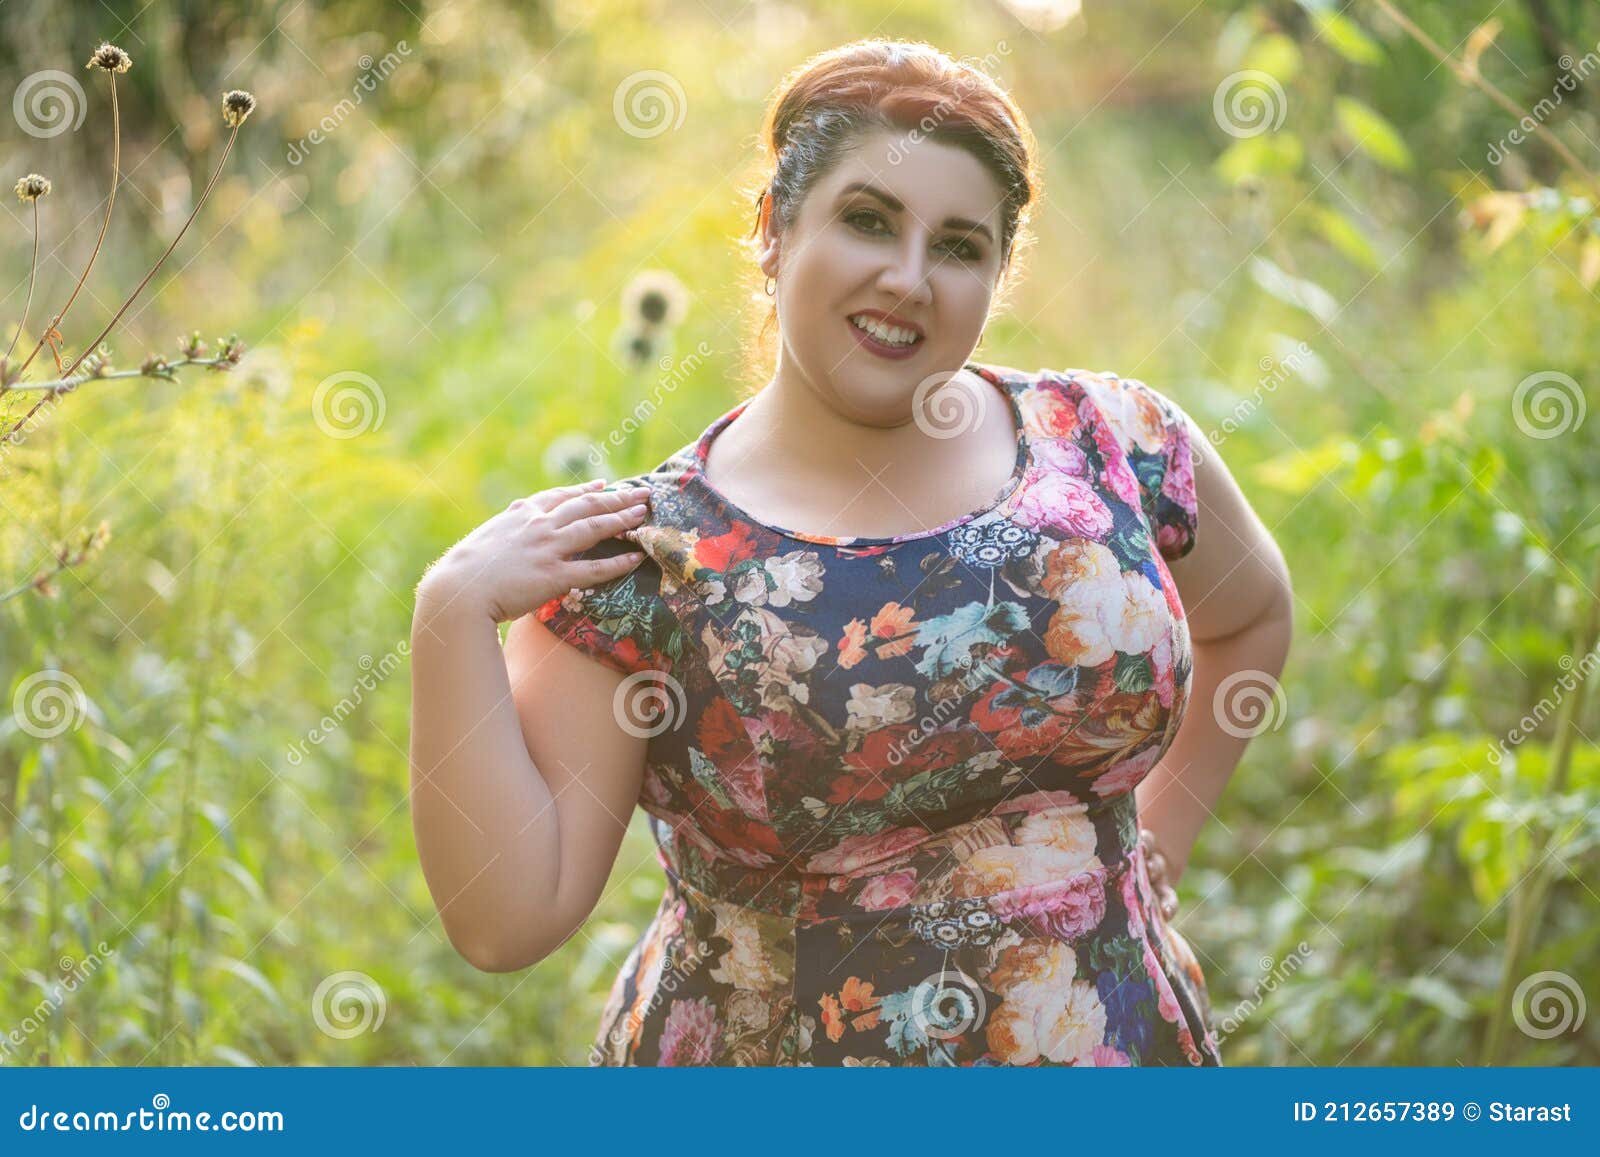 Happy Plus Size Model in Floral Dress Outdoors, Beautiful Fat Woman ...